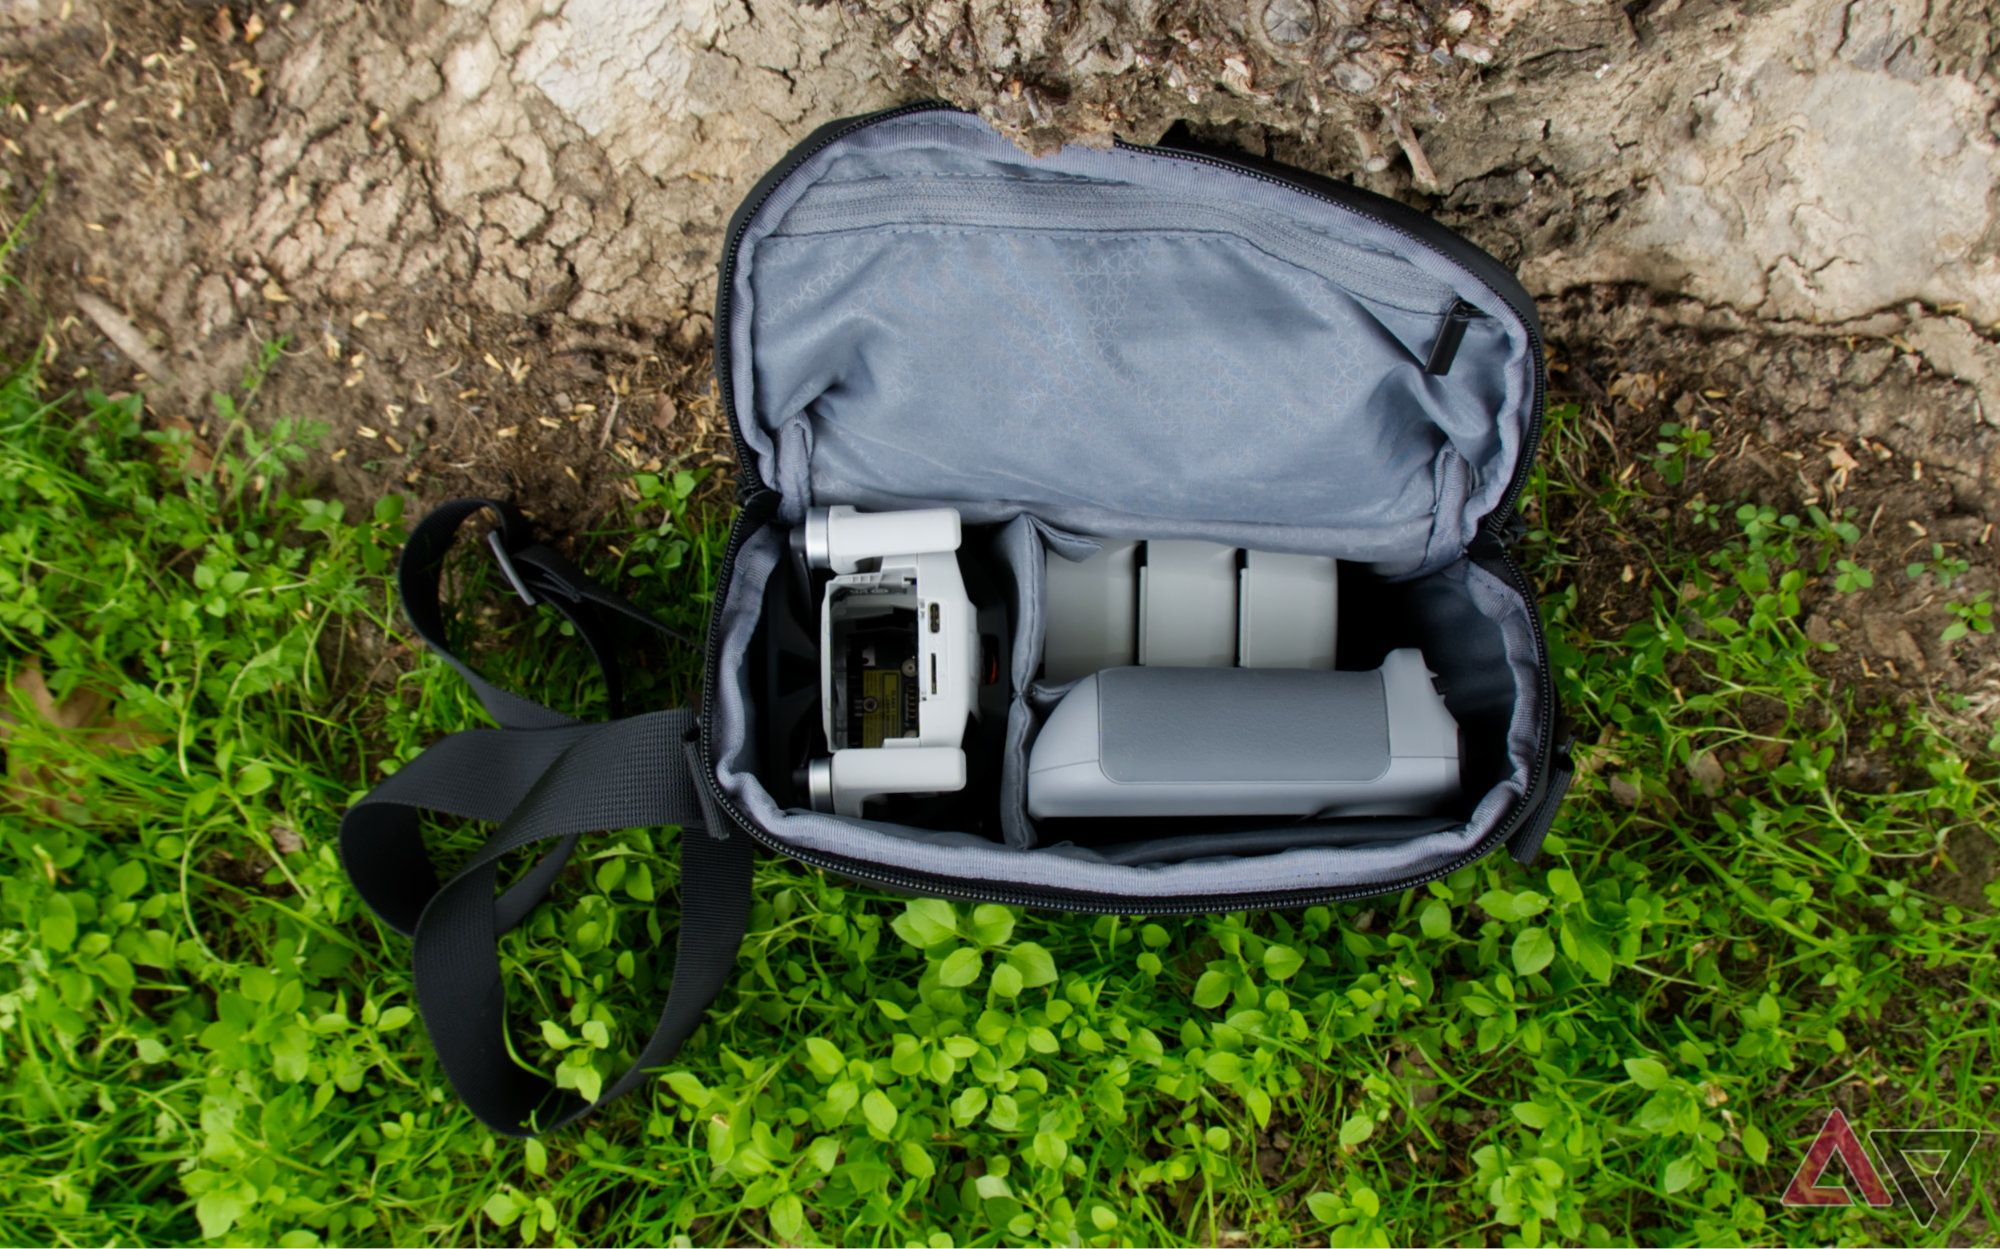 DJI Mini 4 Pro, controller, and batteries inside of the bag from the fly more kit, sitting against a tree and on the grass